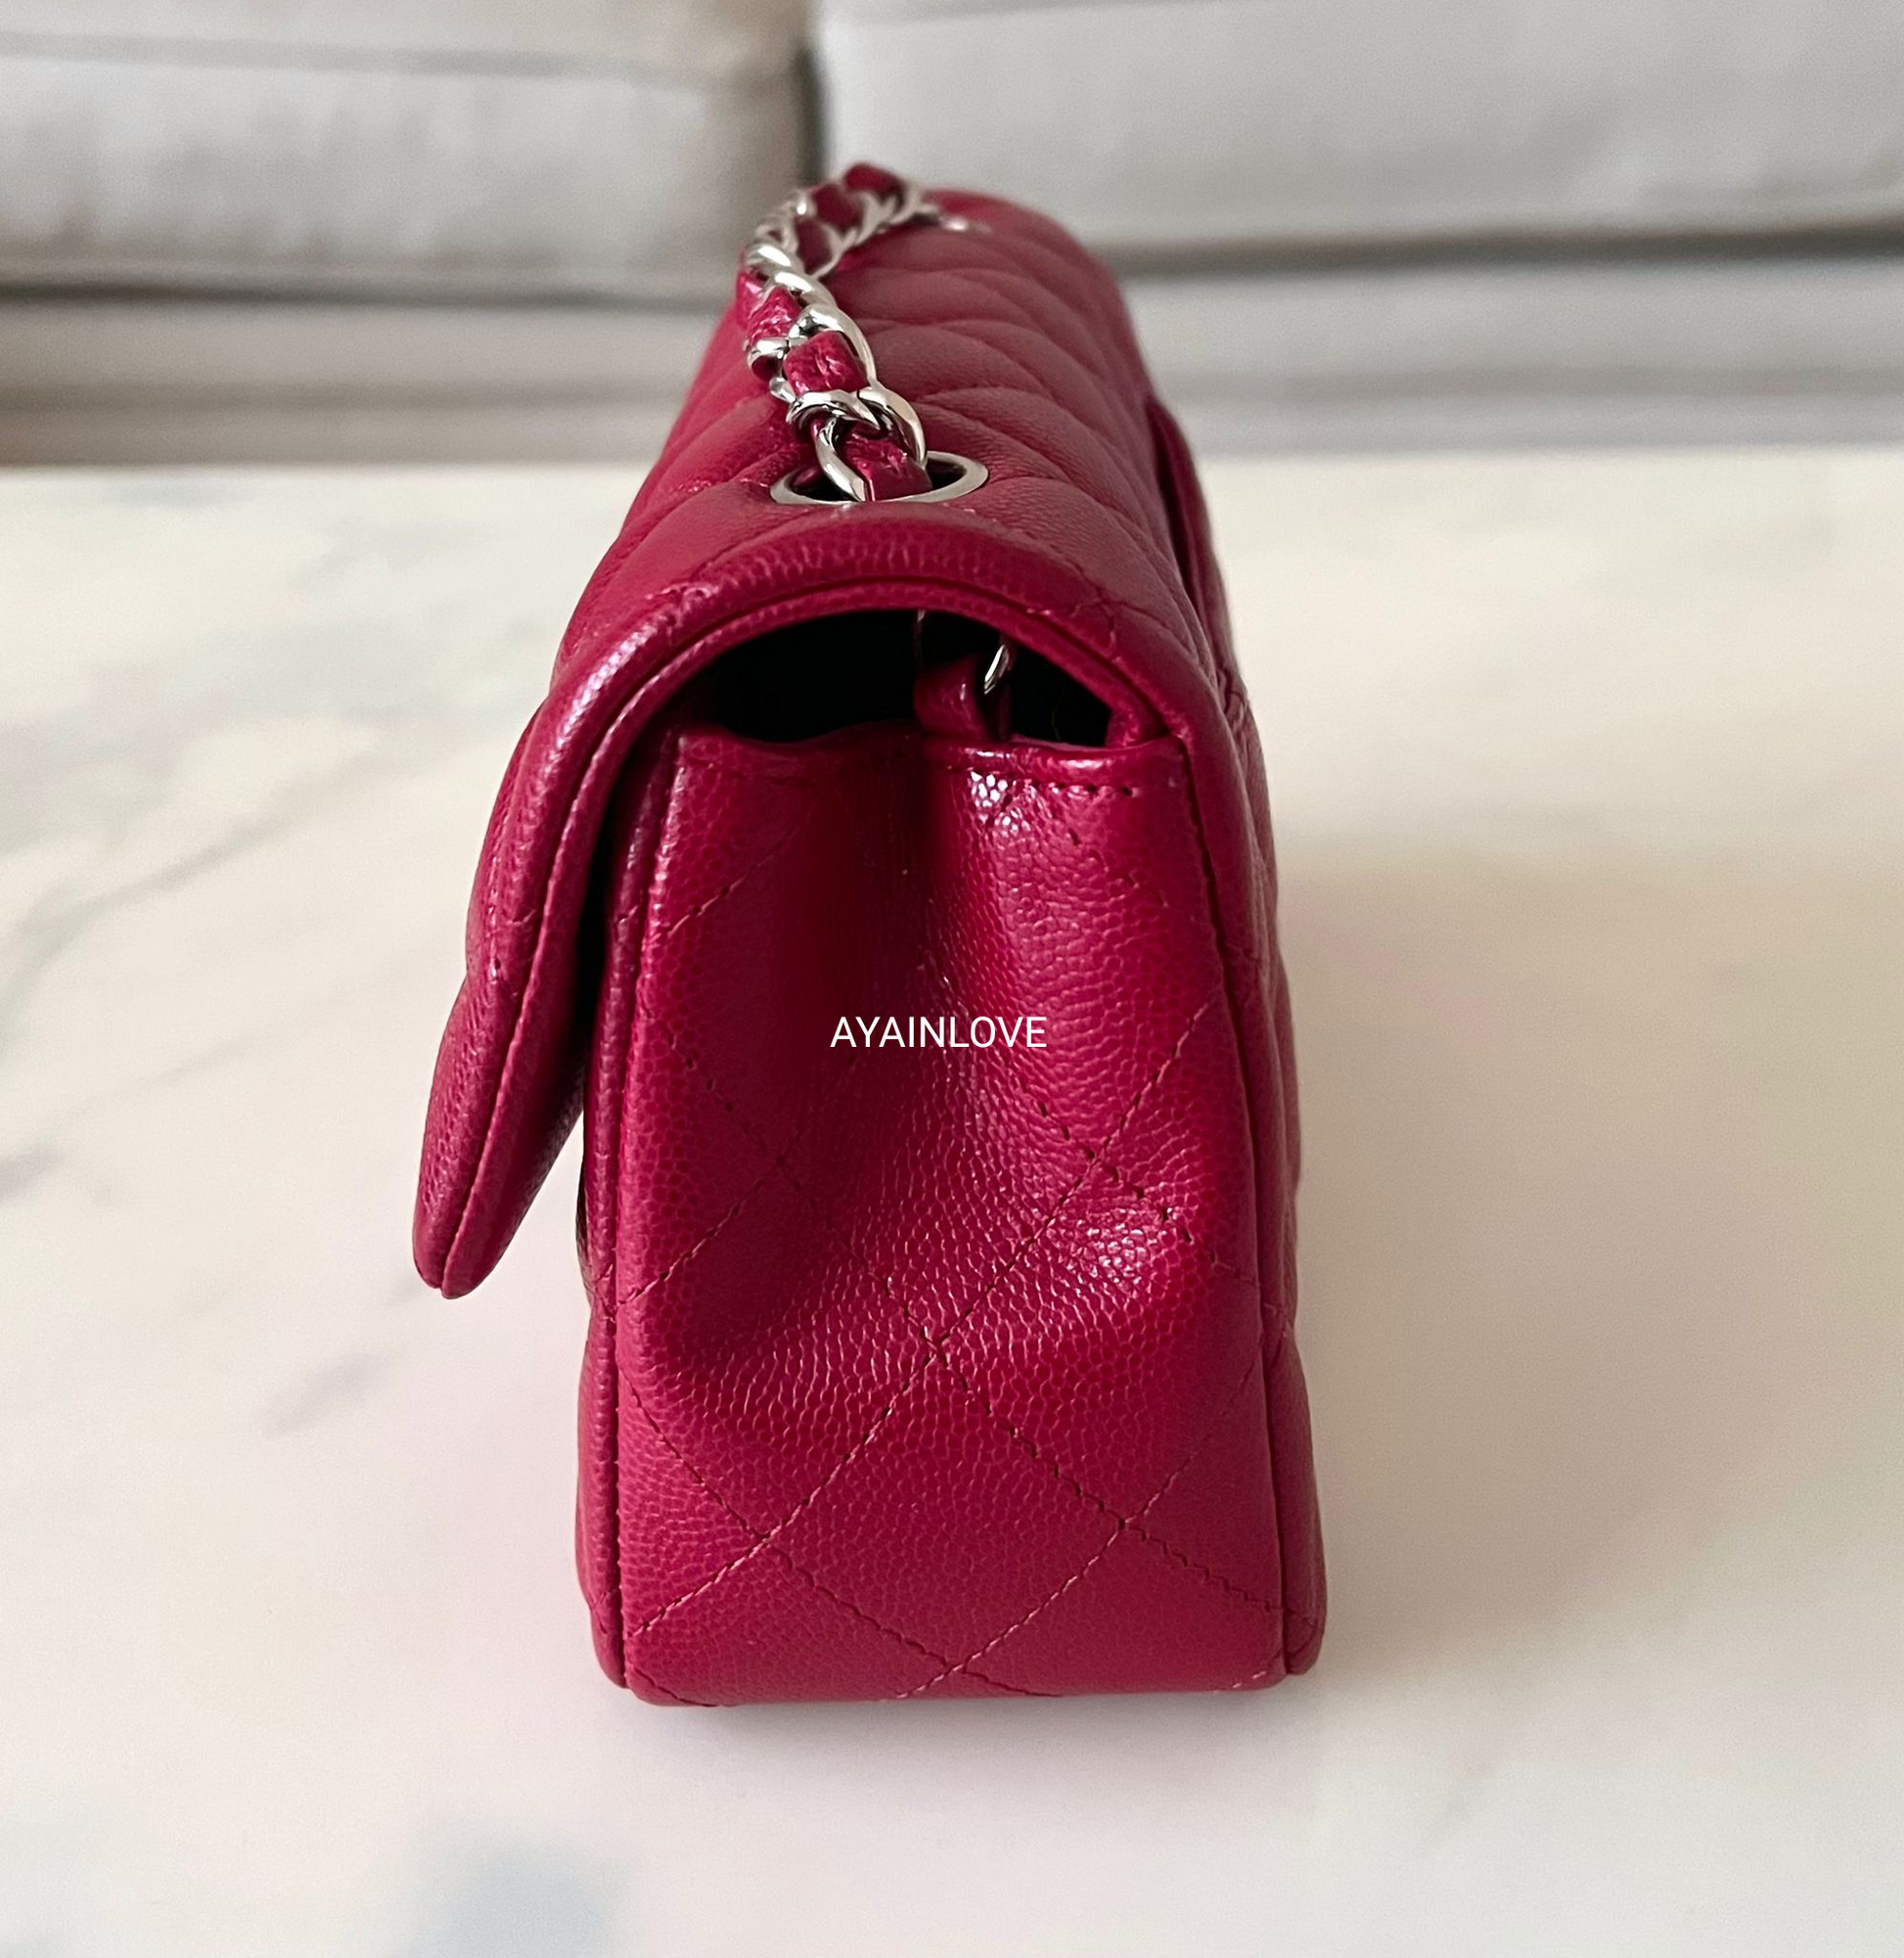 Chanel Classic Mini Rectangular Flap 17B Red Caviar with silver hardware